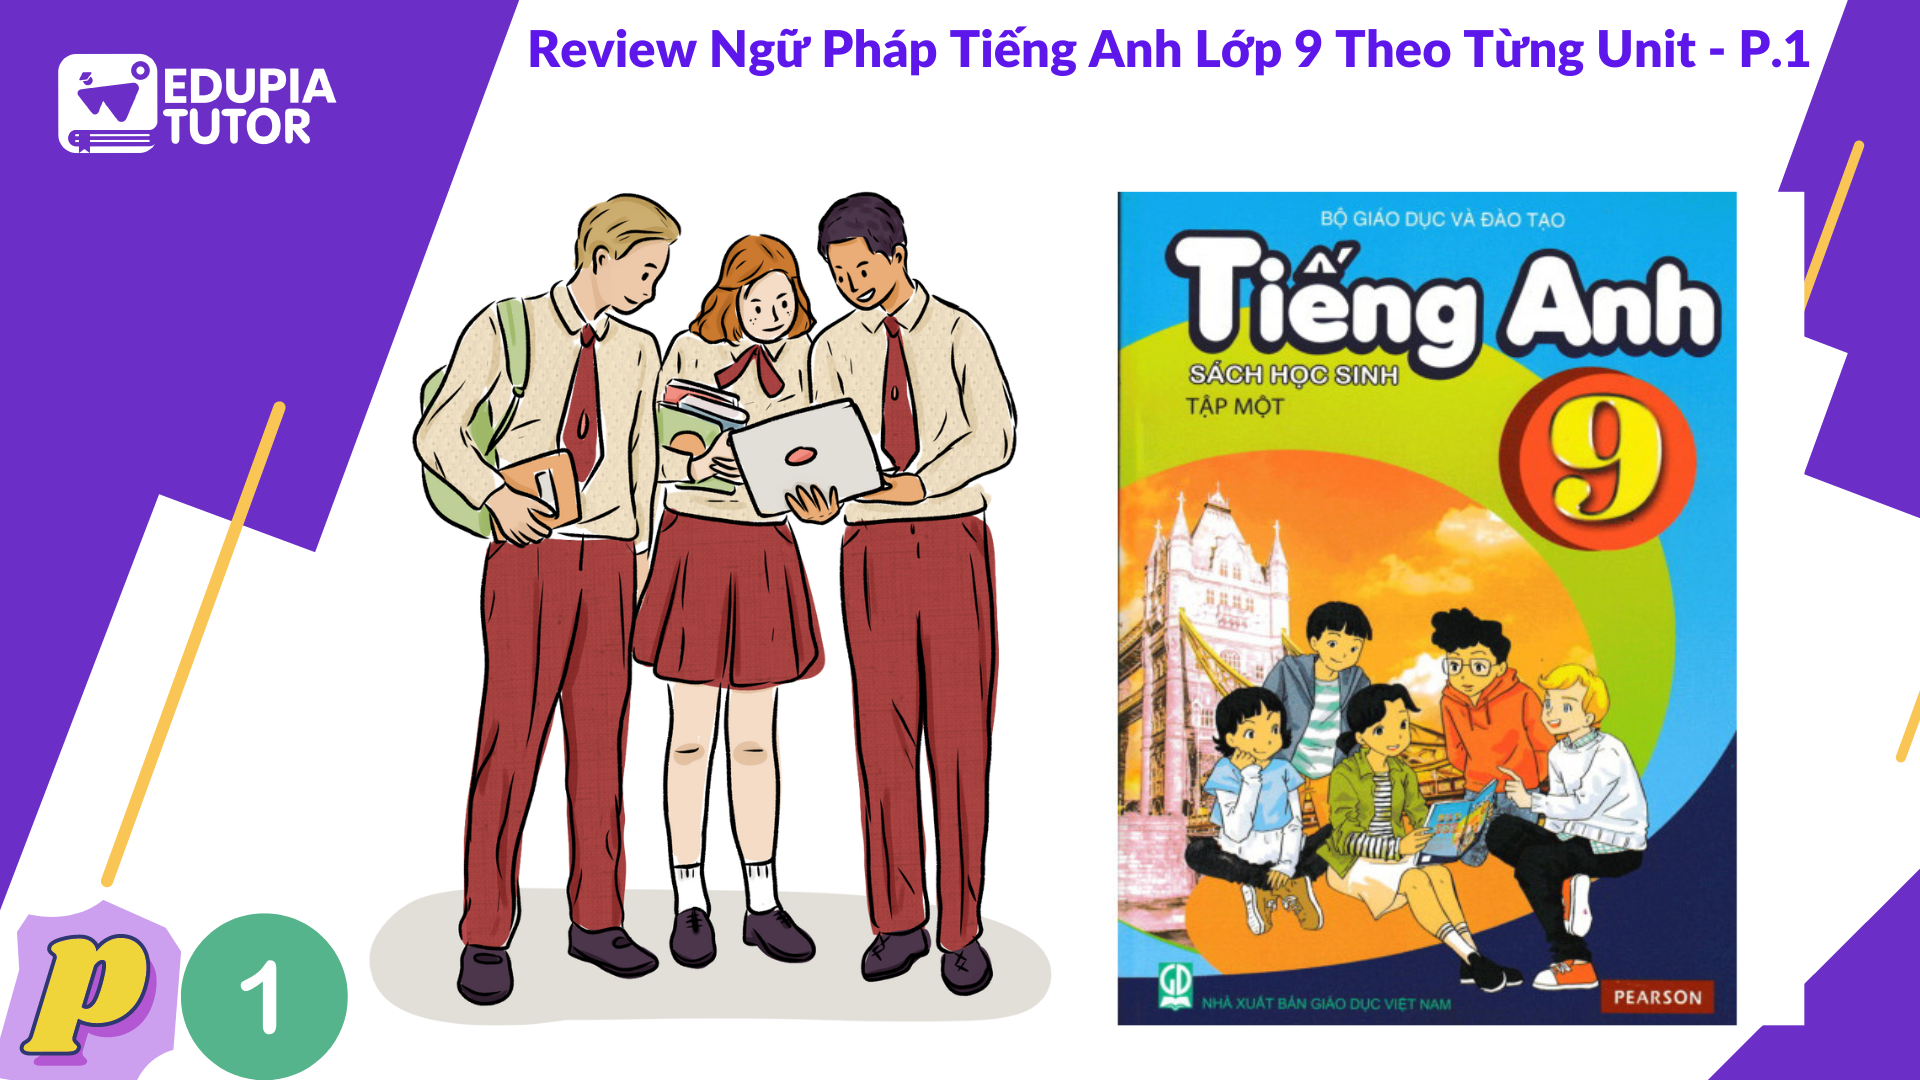 Review Ngữ Pháp Tiếng Anh Lớp 9 Theo Từng Unit - P.1